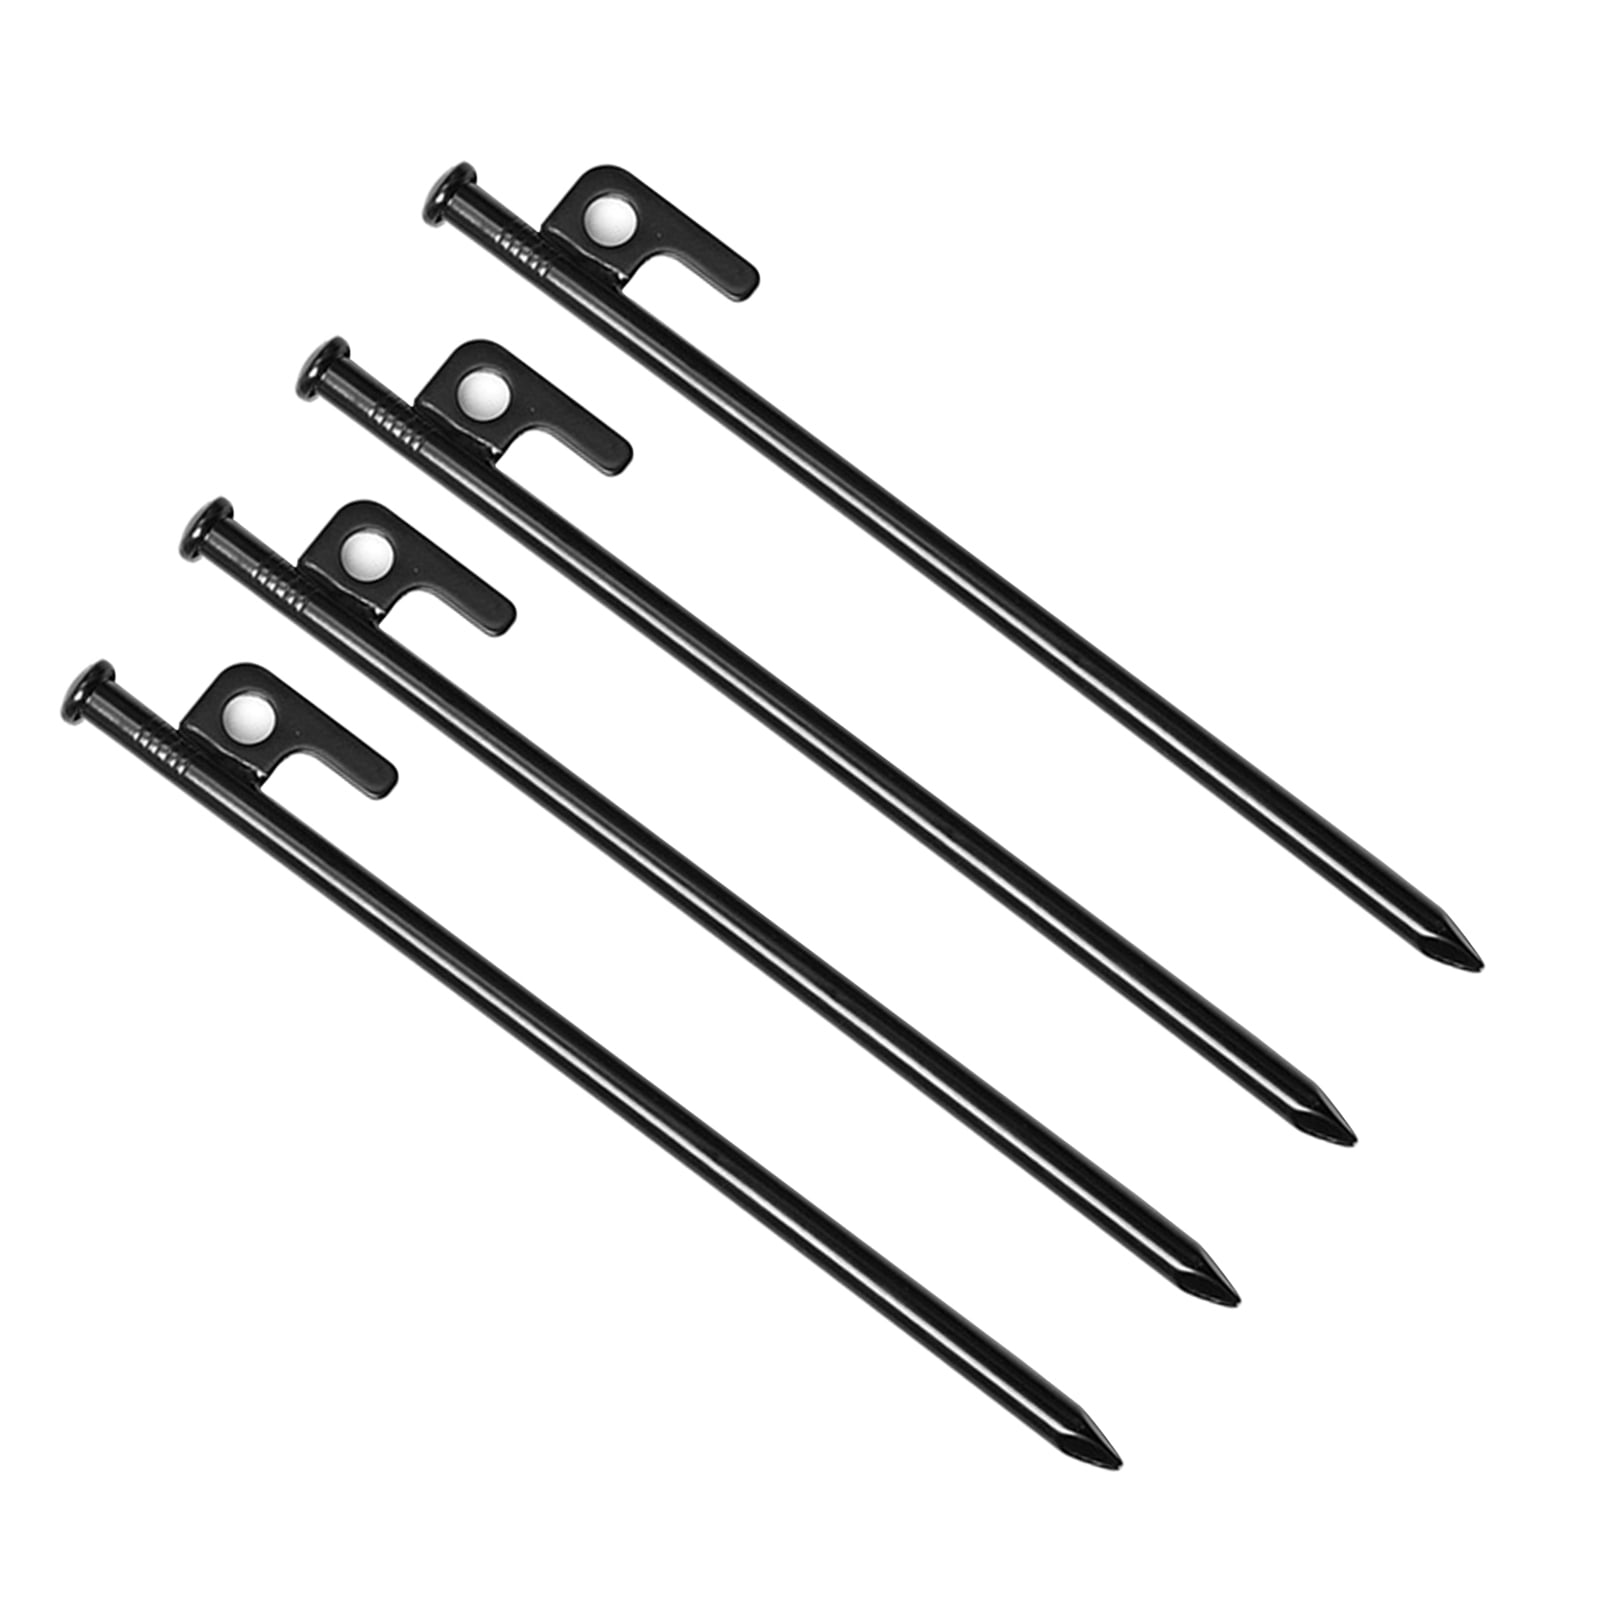 4 Steel Hook Stakes 12" 18" Tent Inflatable Camping Canopy Garden Anchor Pegs 